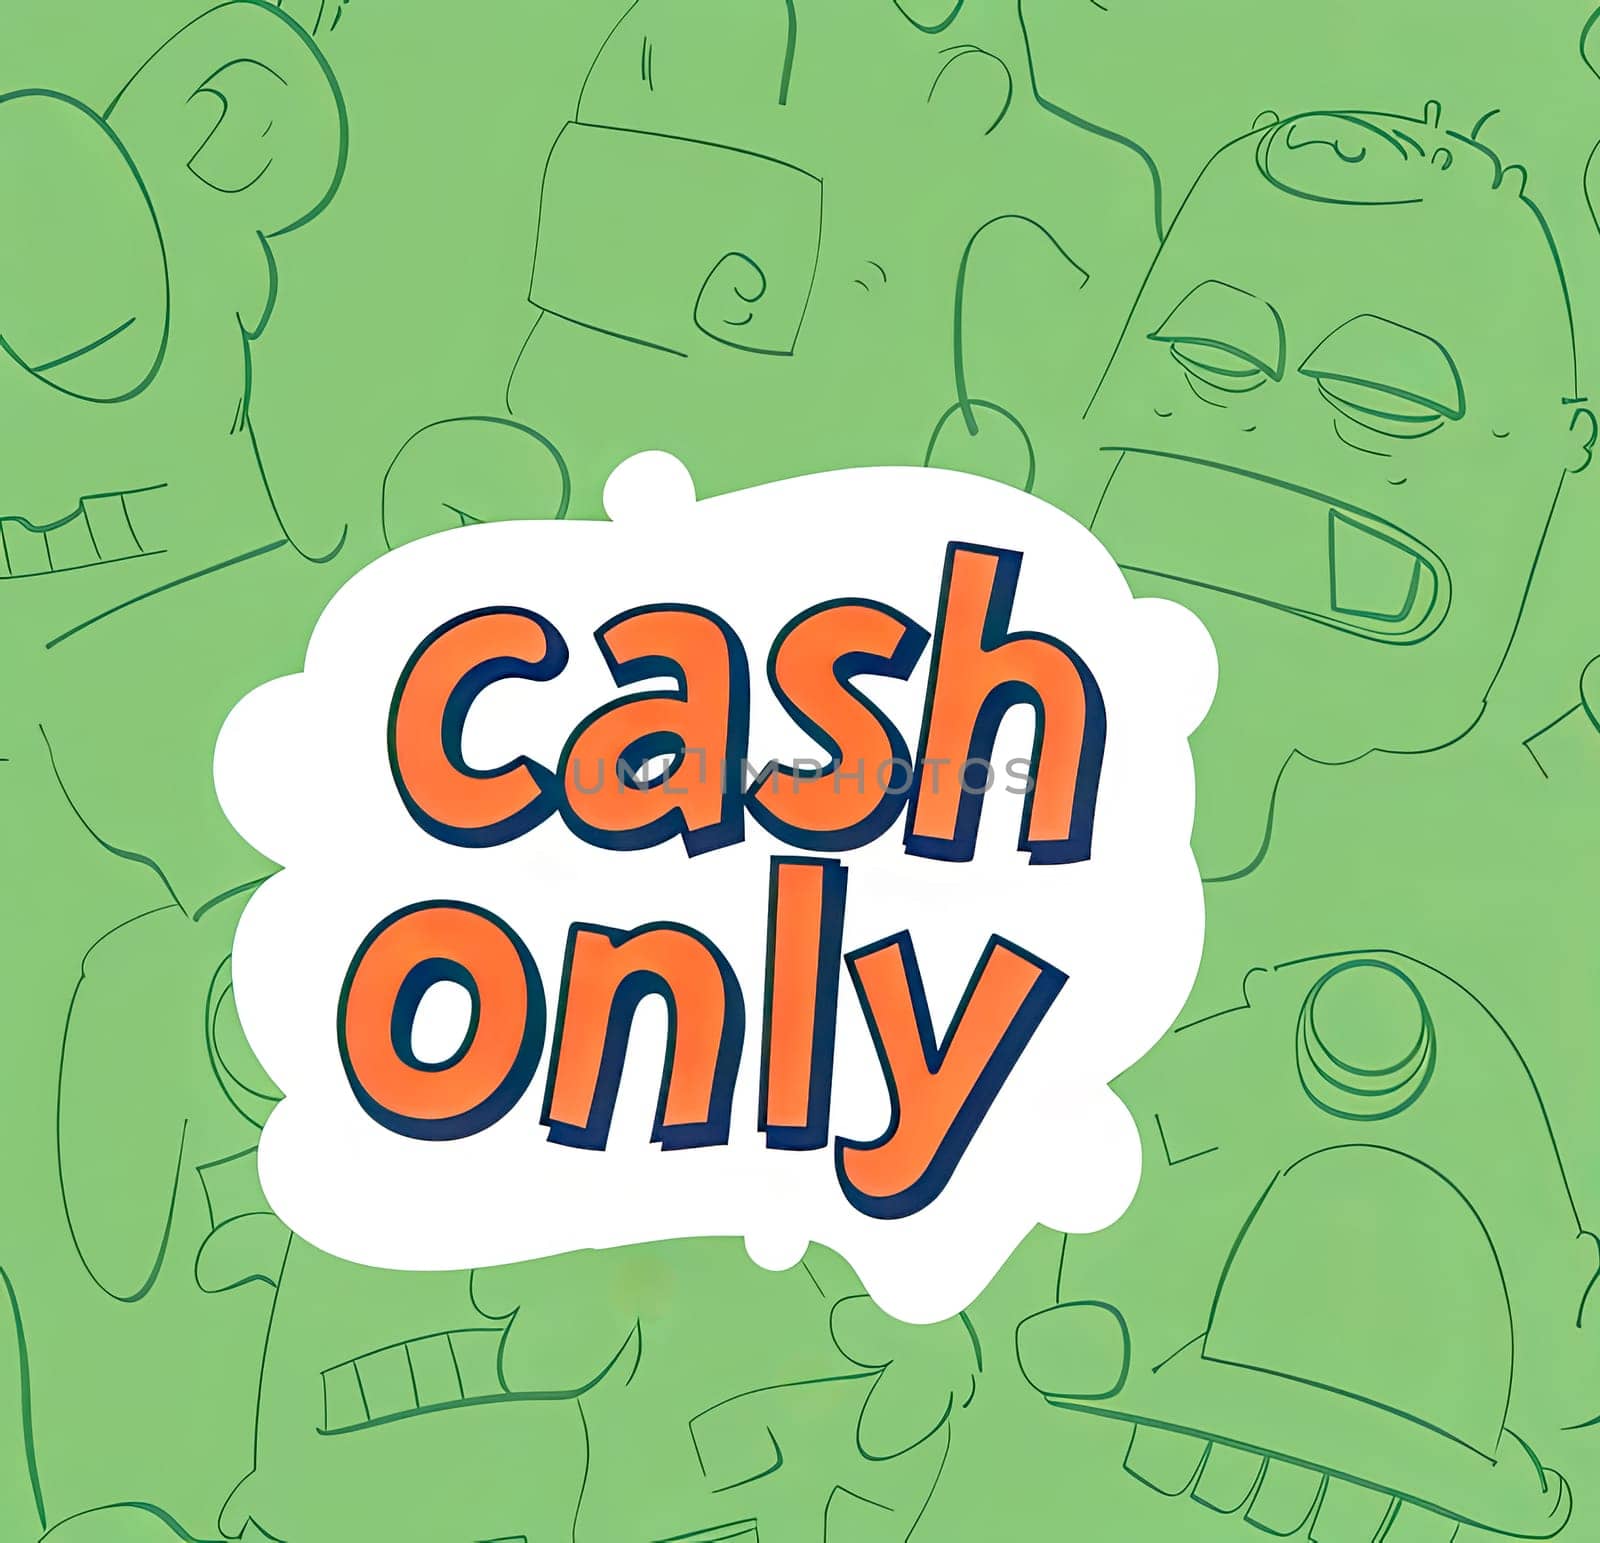 Cash only sign illustration with cartoon background by Edophoto